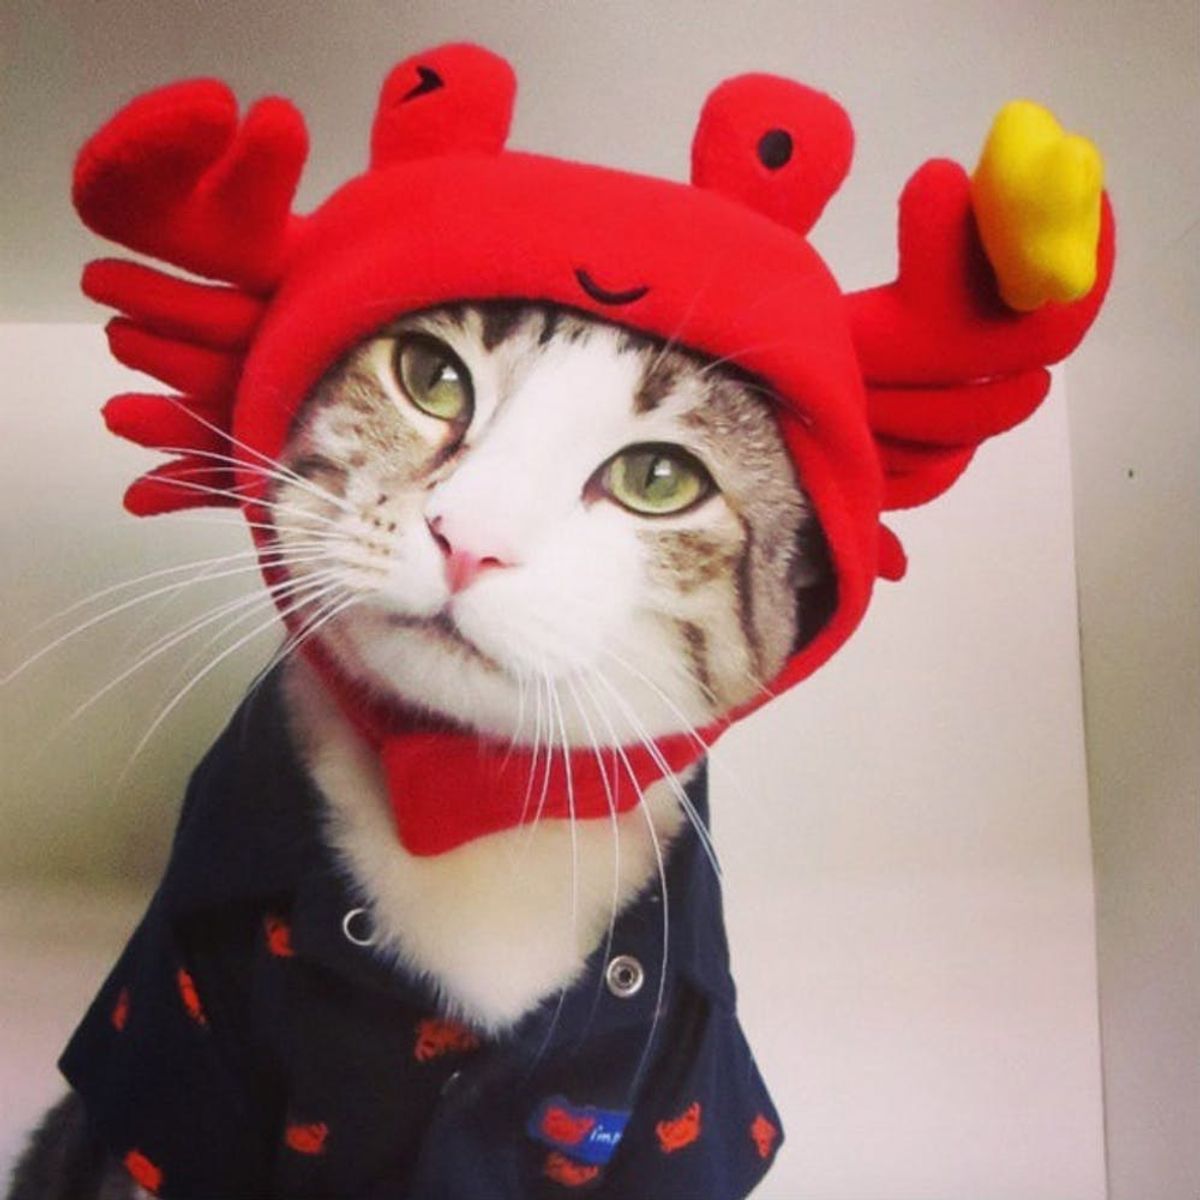 50 Cat Halloween Costumes That Are Purr-fect